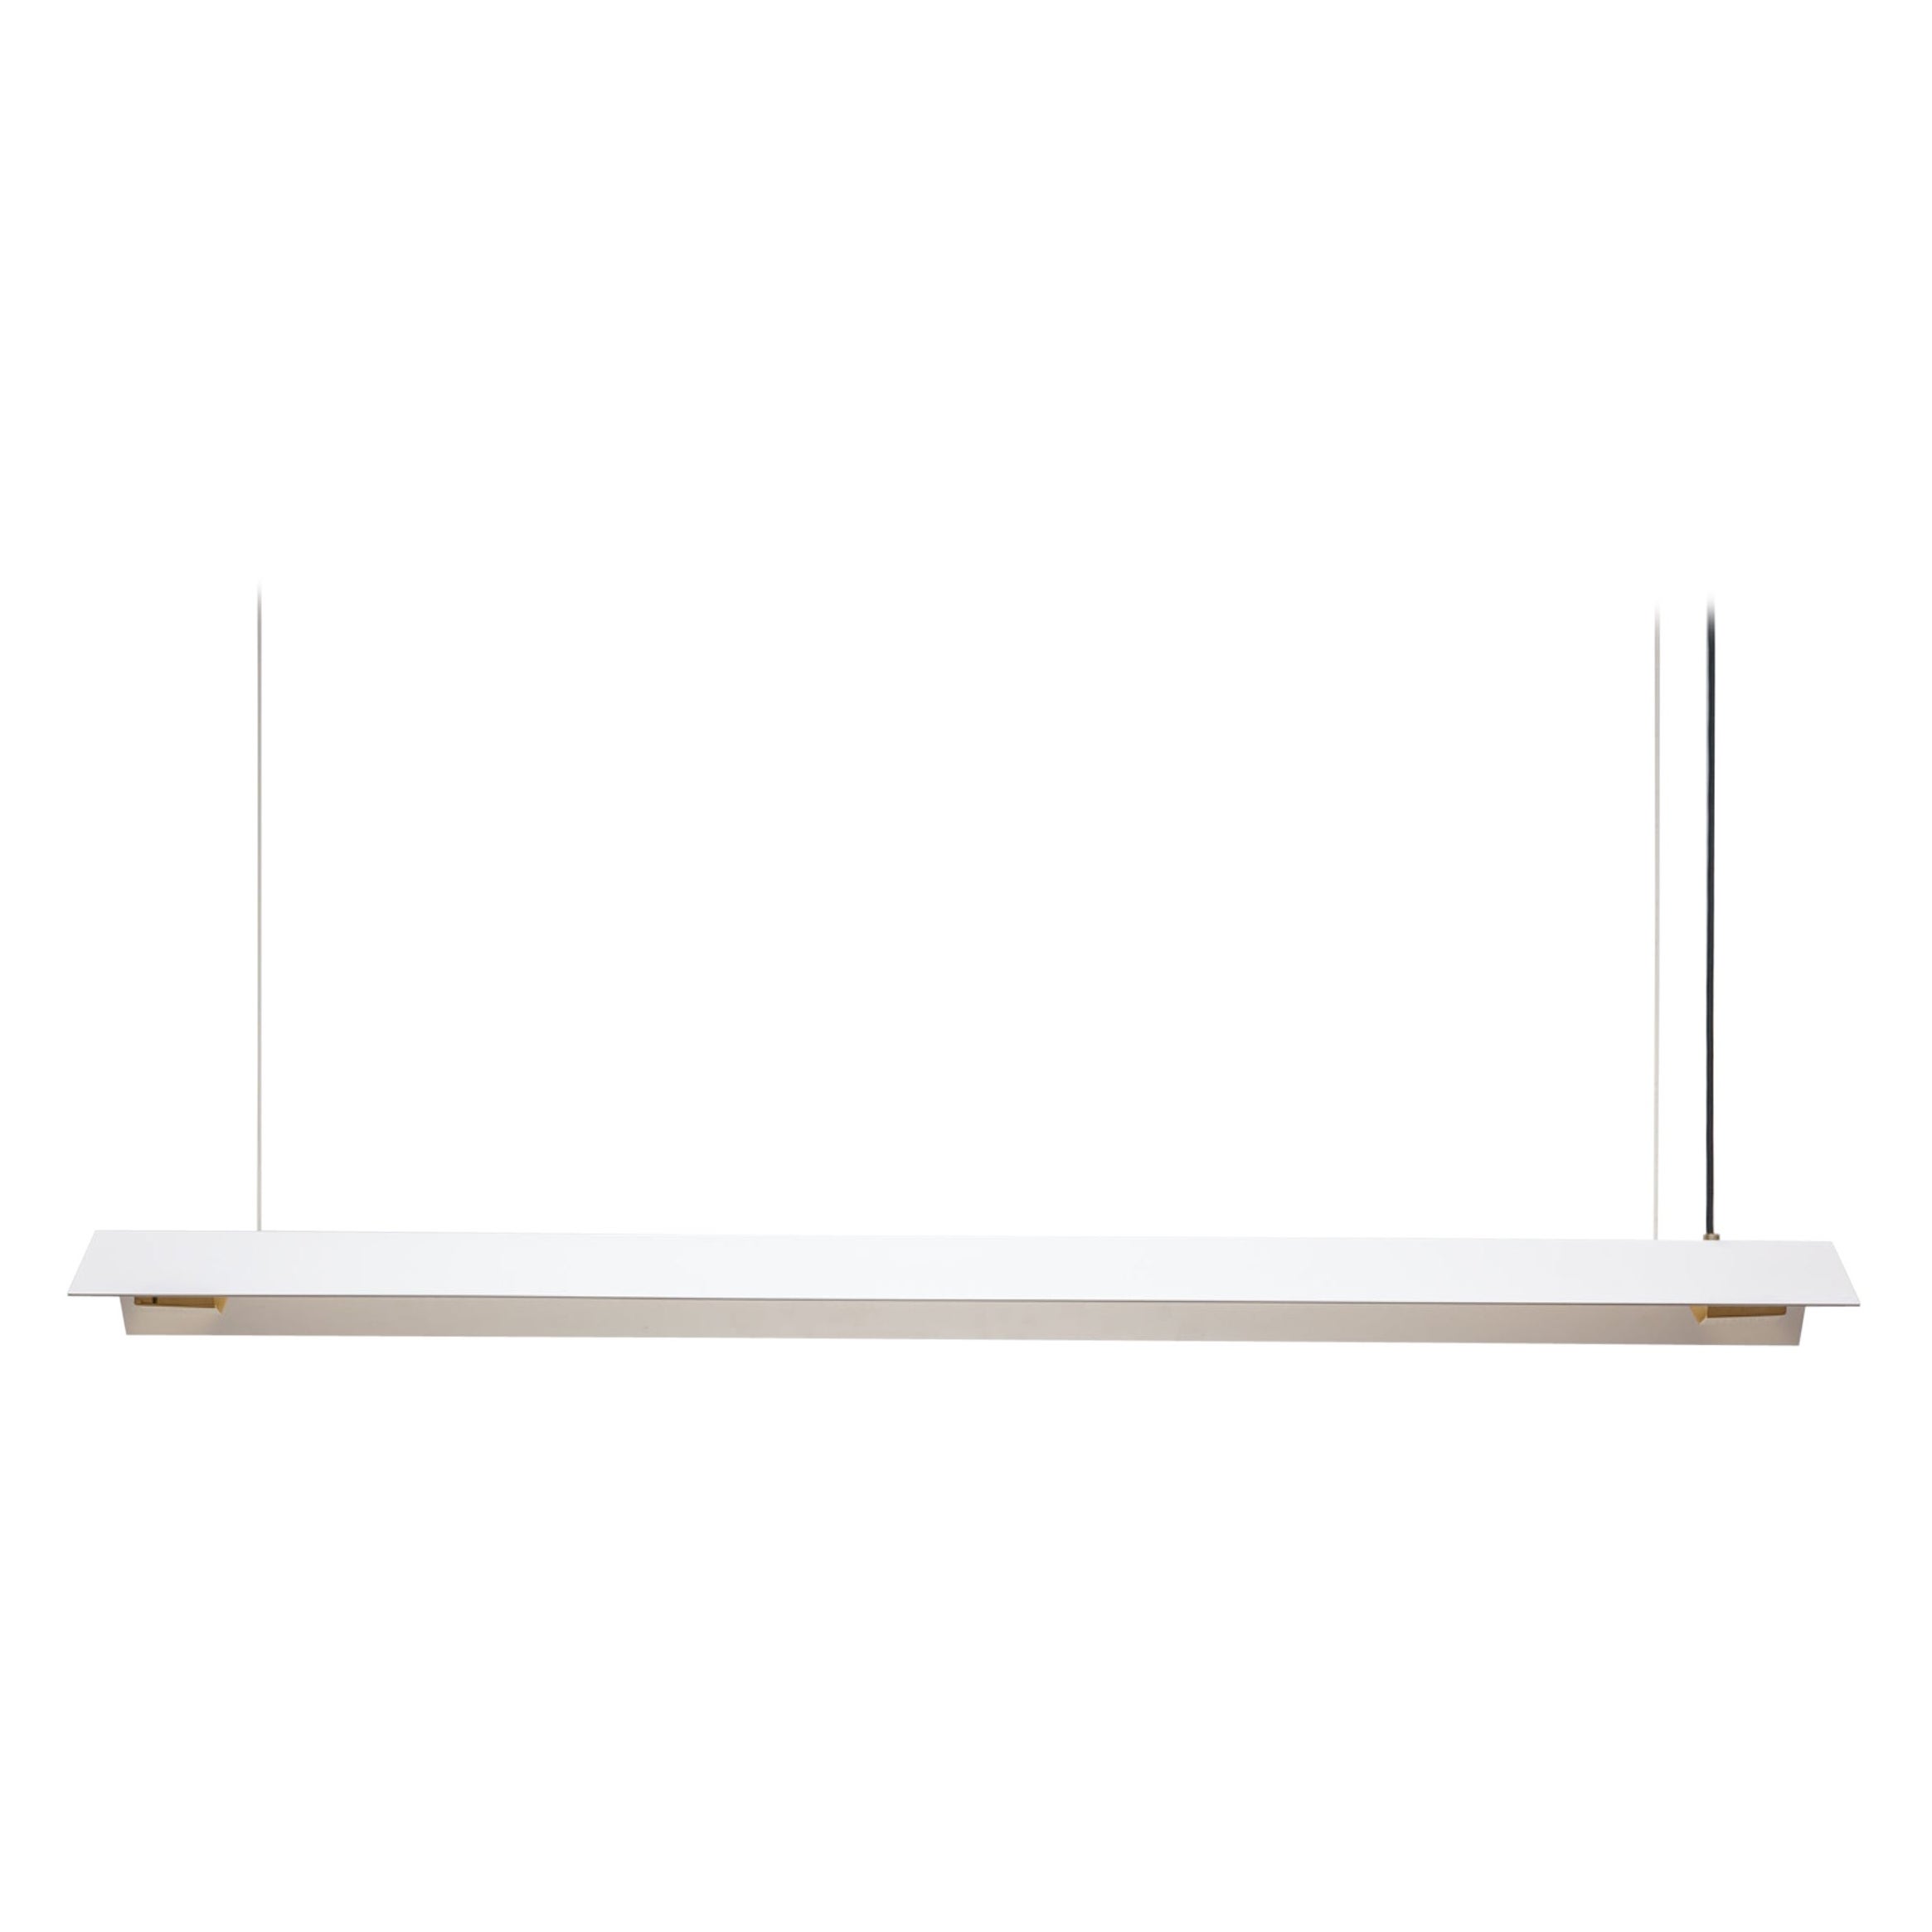 Small Misalliance Ex Pure White Suspended Light by Lexavala For Sale